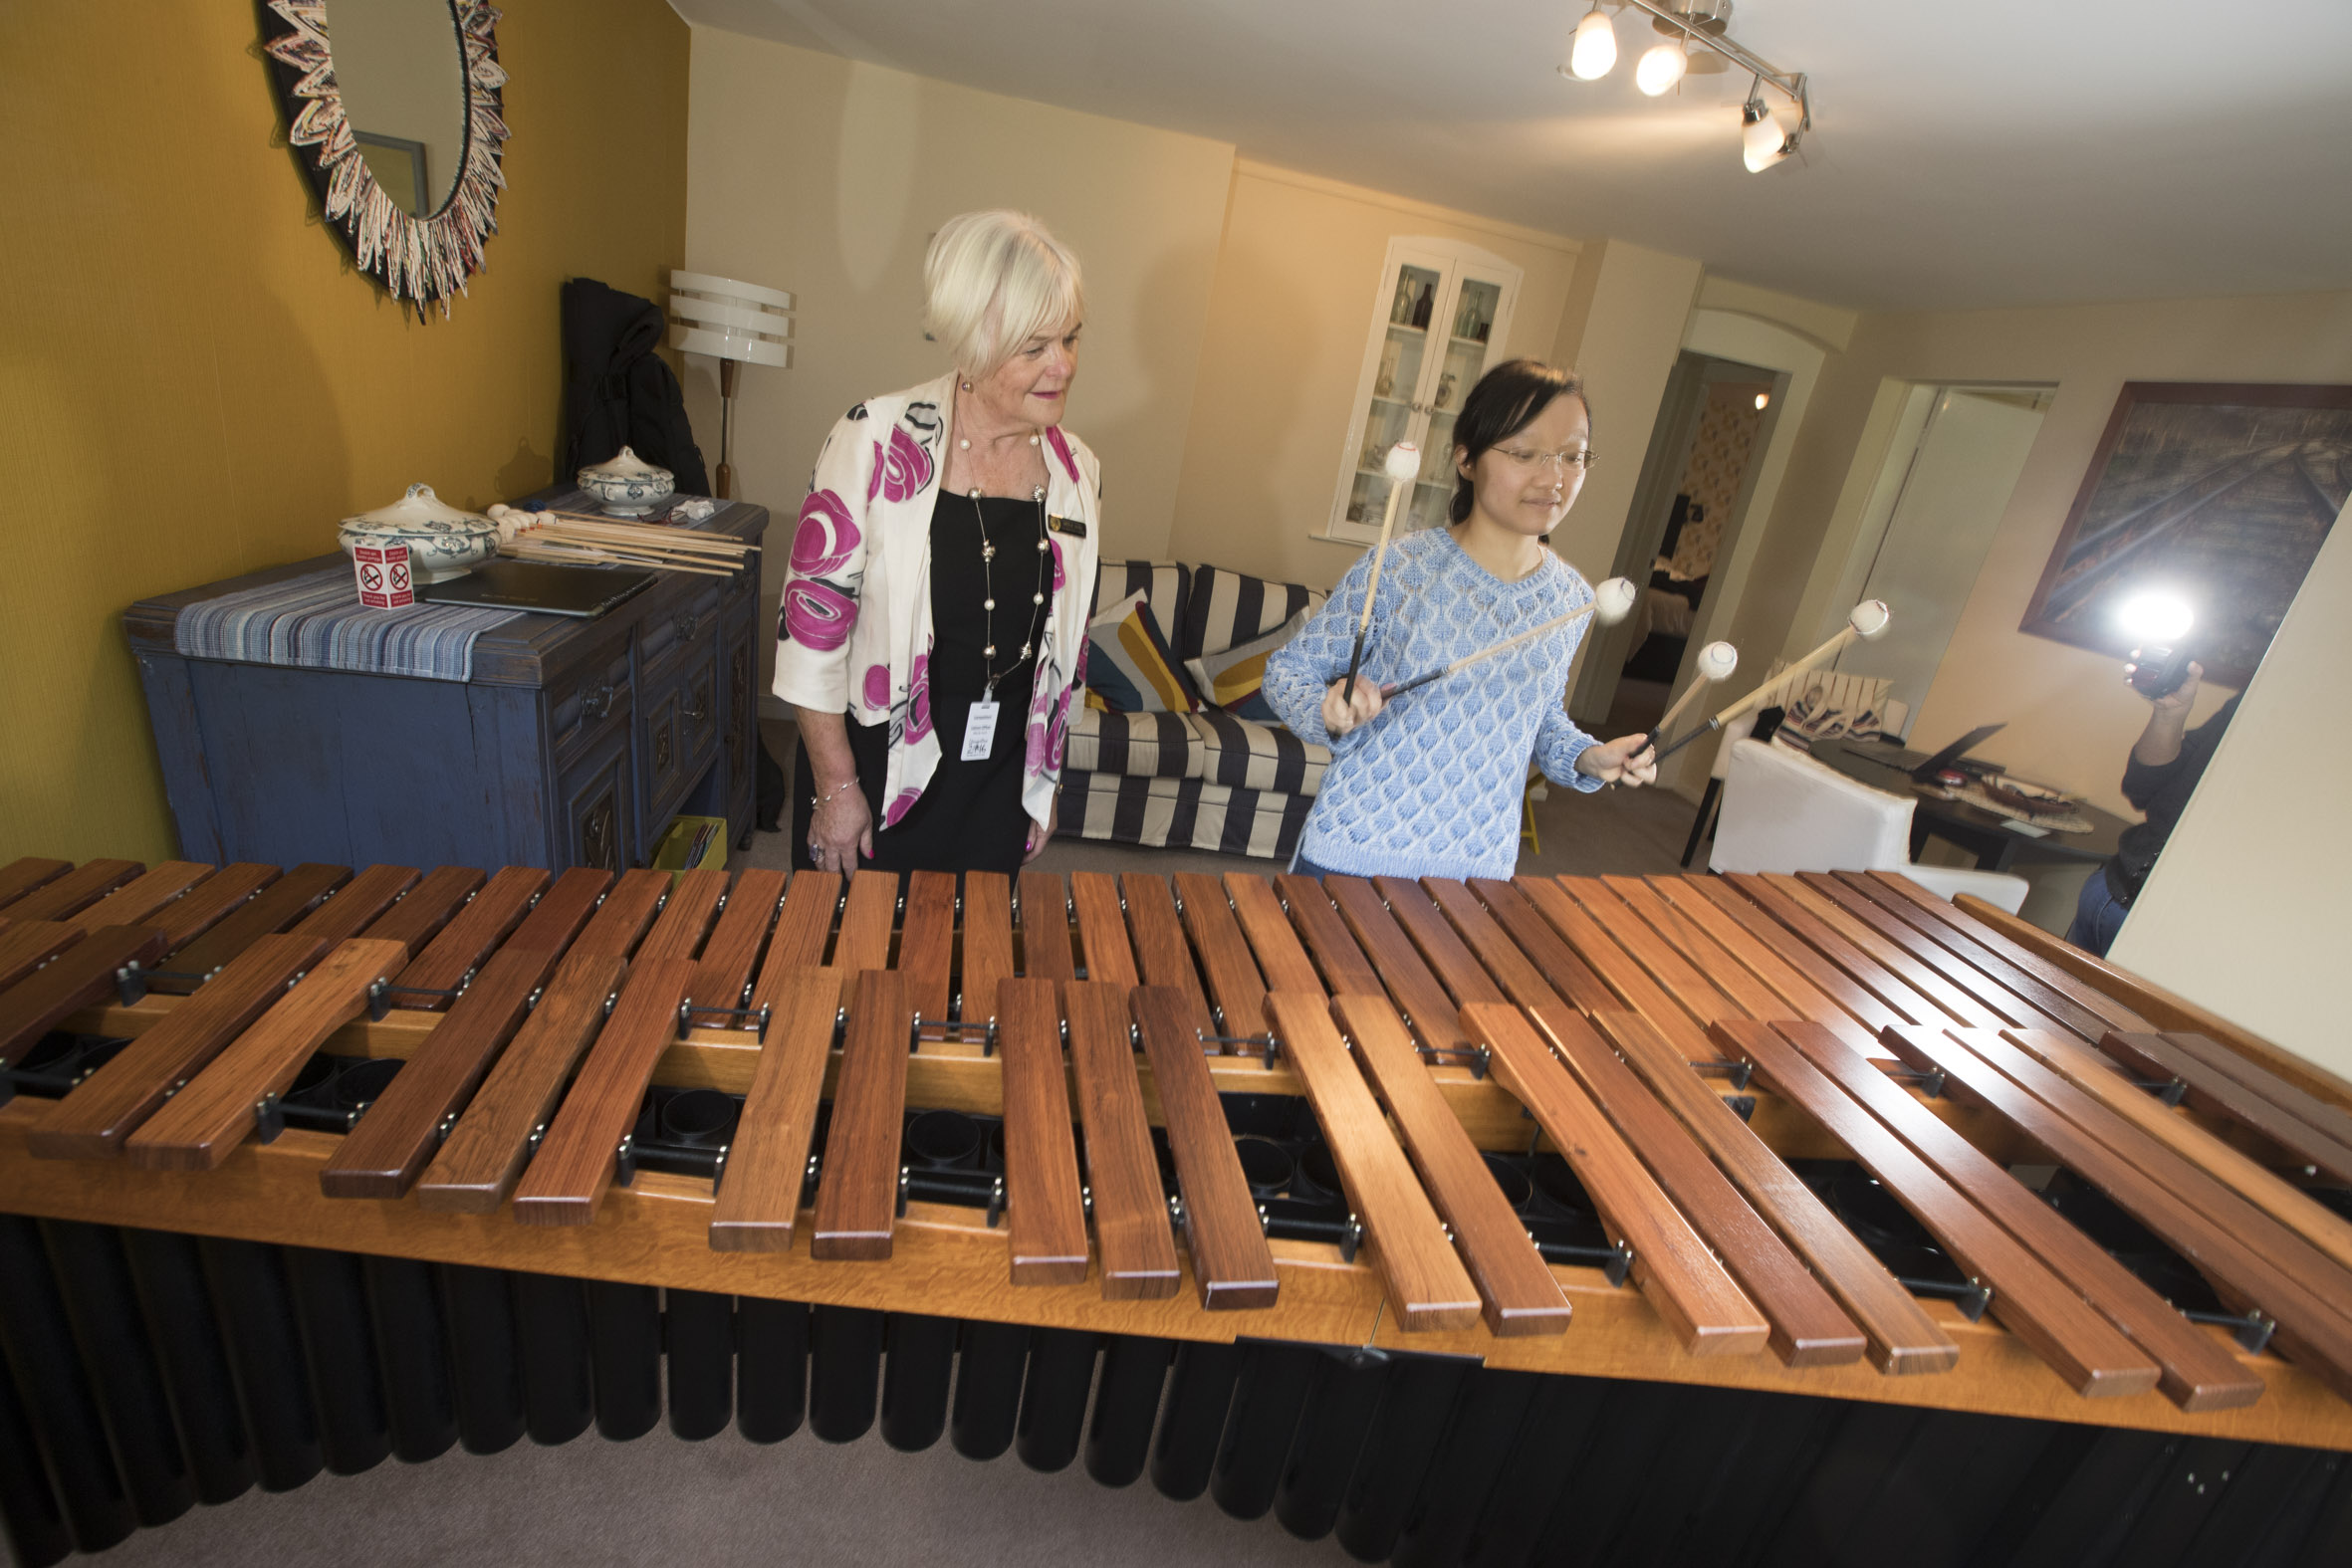 How do you solve a problem like a marimba – just ask Merle